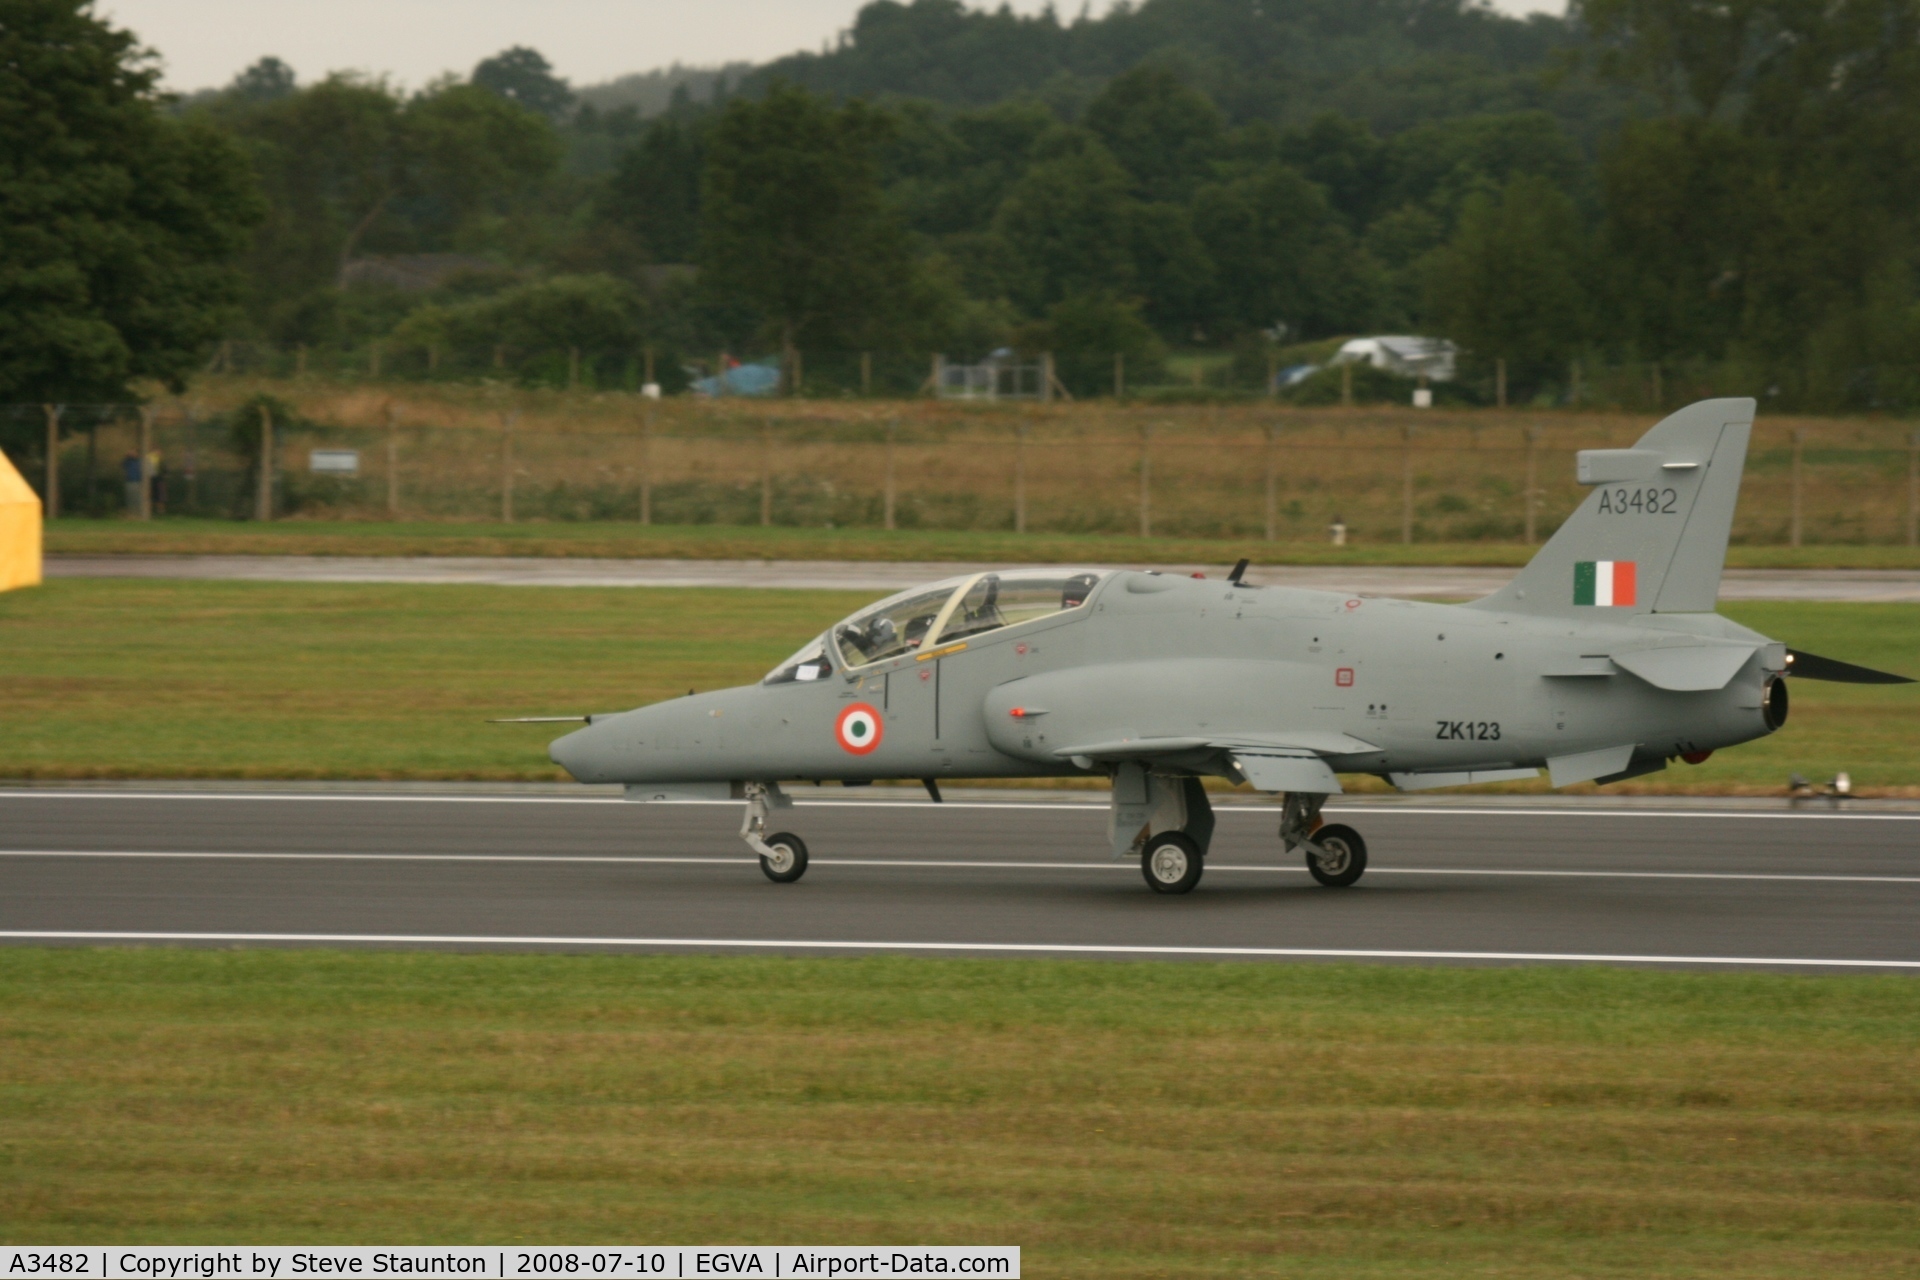 A3482, 2007 British Aerospace Hawk 132 C/N HT003/0903, Taken at the Royal International Air Tattoo 2008 during arrivals and departures (show days cancelled due to bad weather)